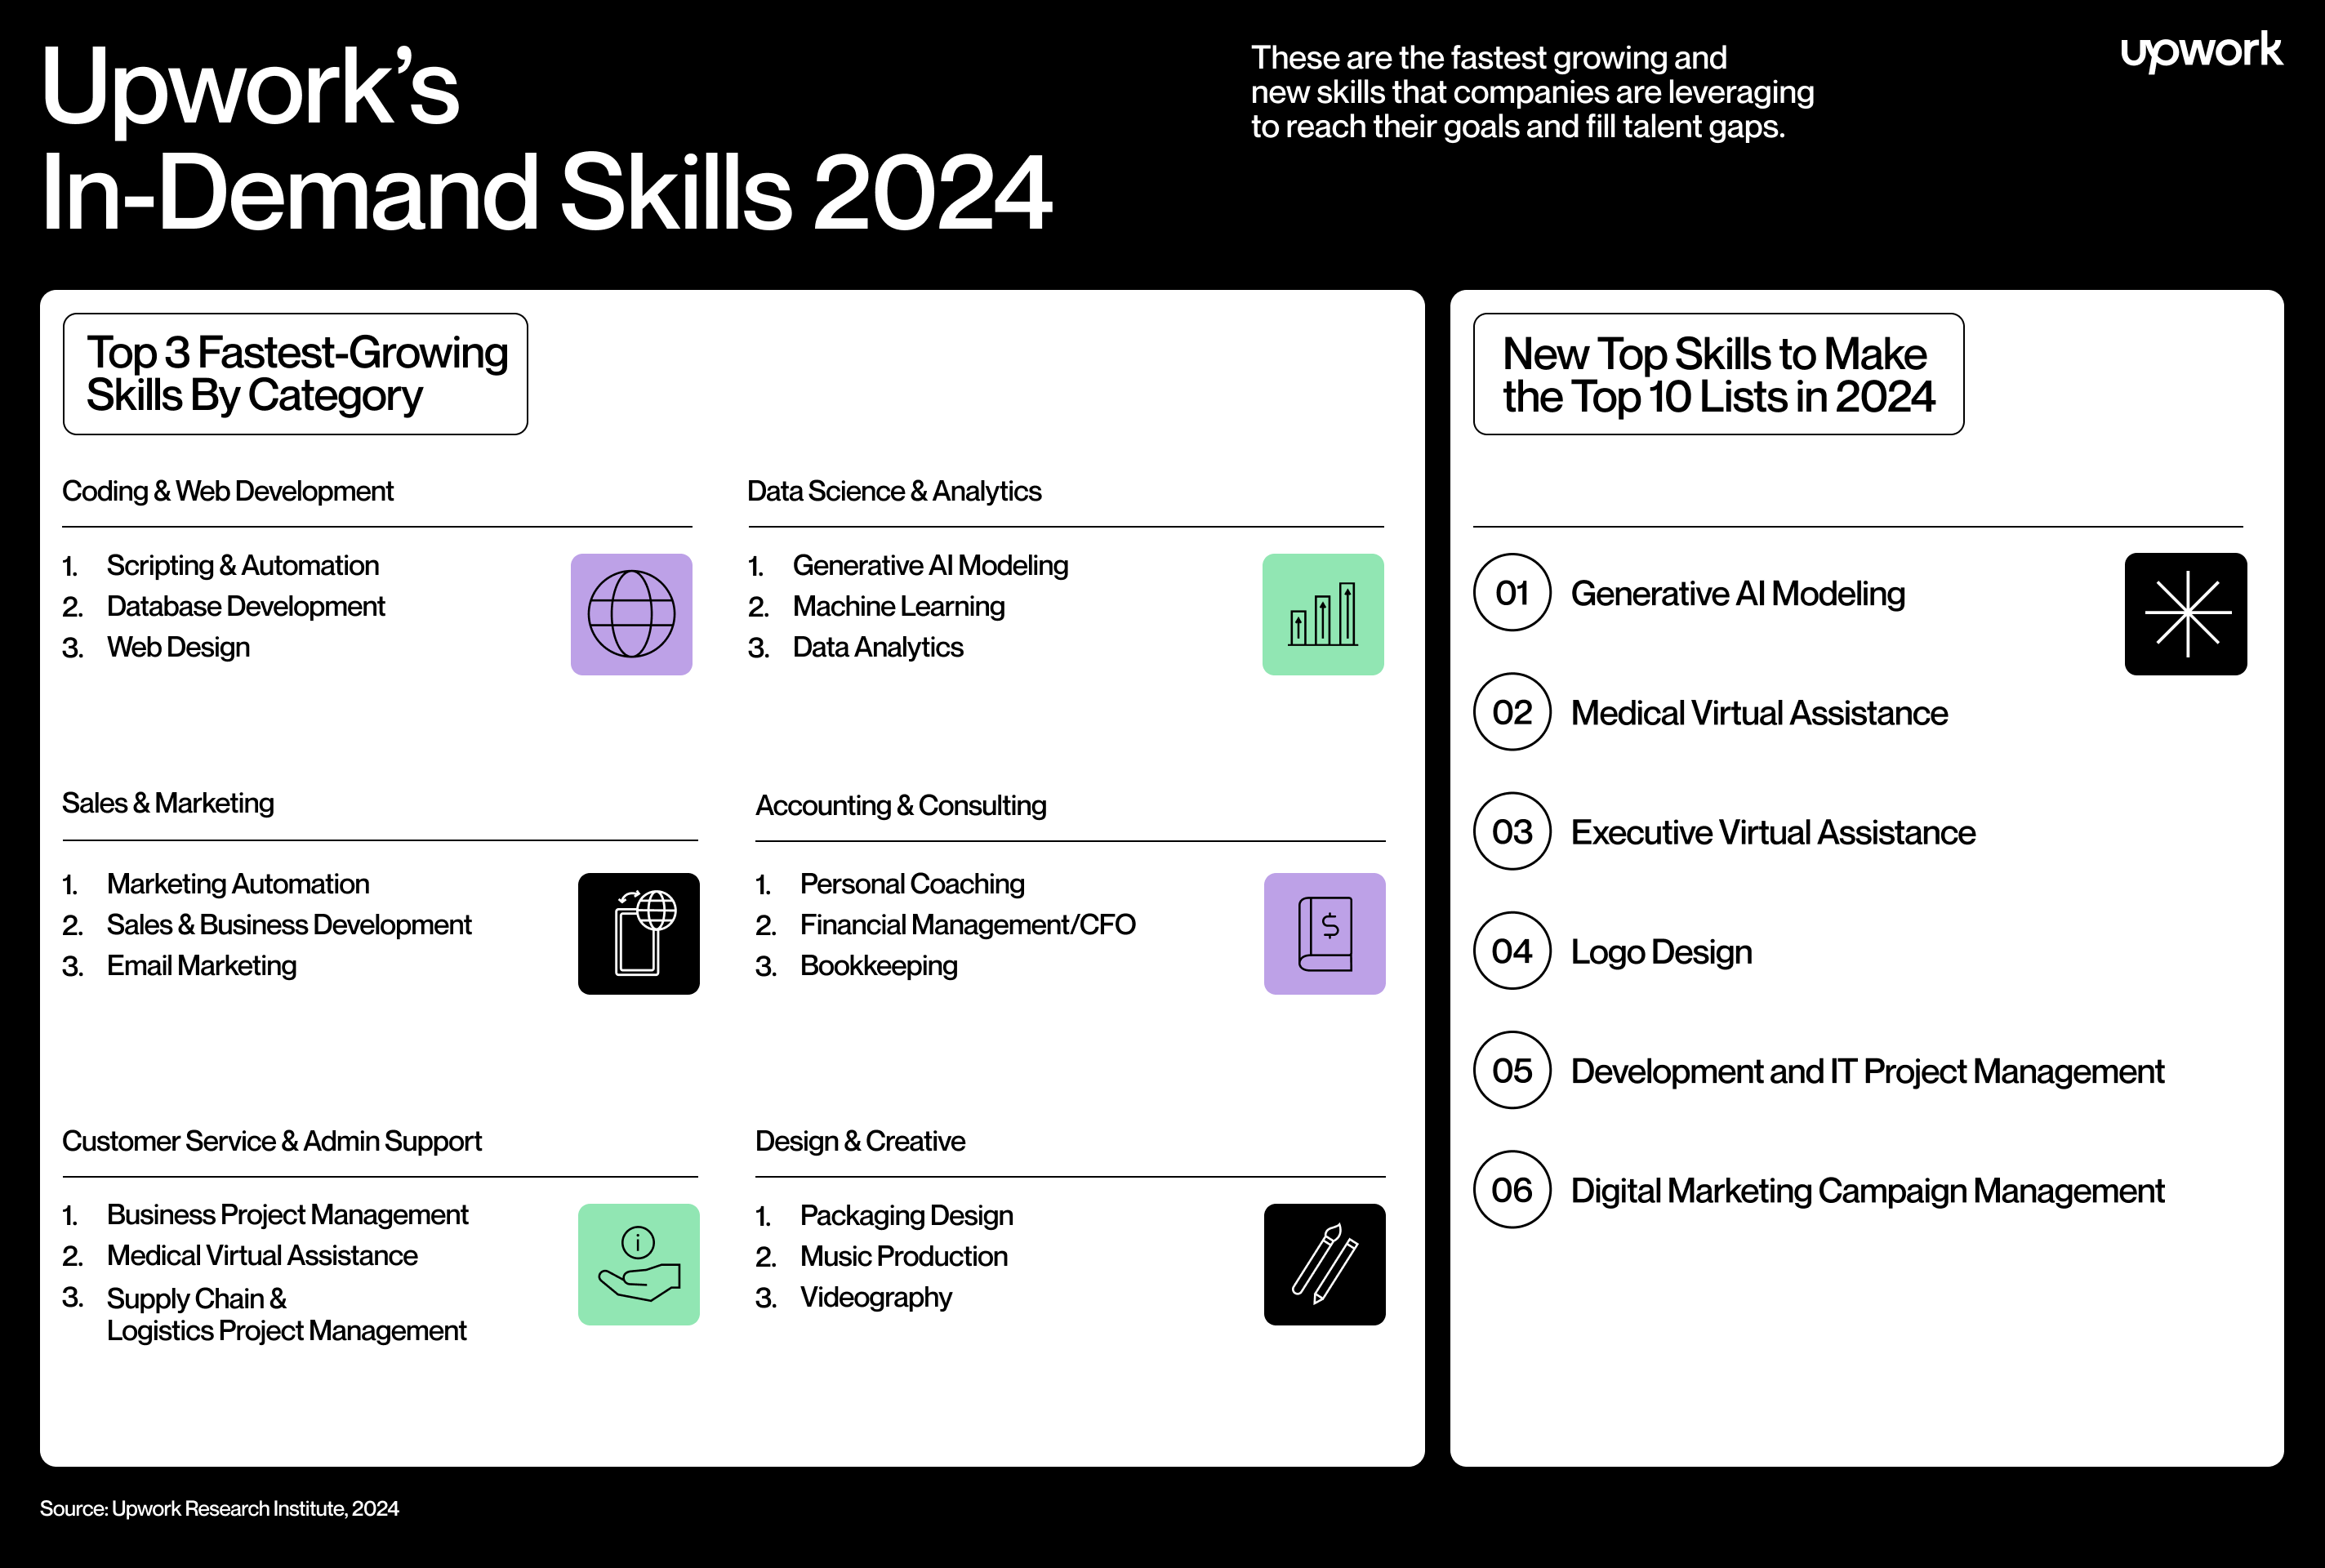 Upwork data showing the top 10 most in demand skills for 2024.